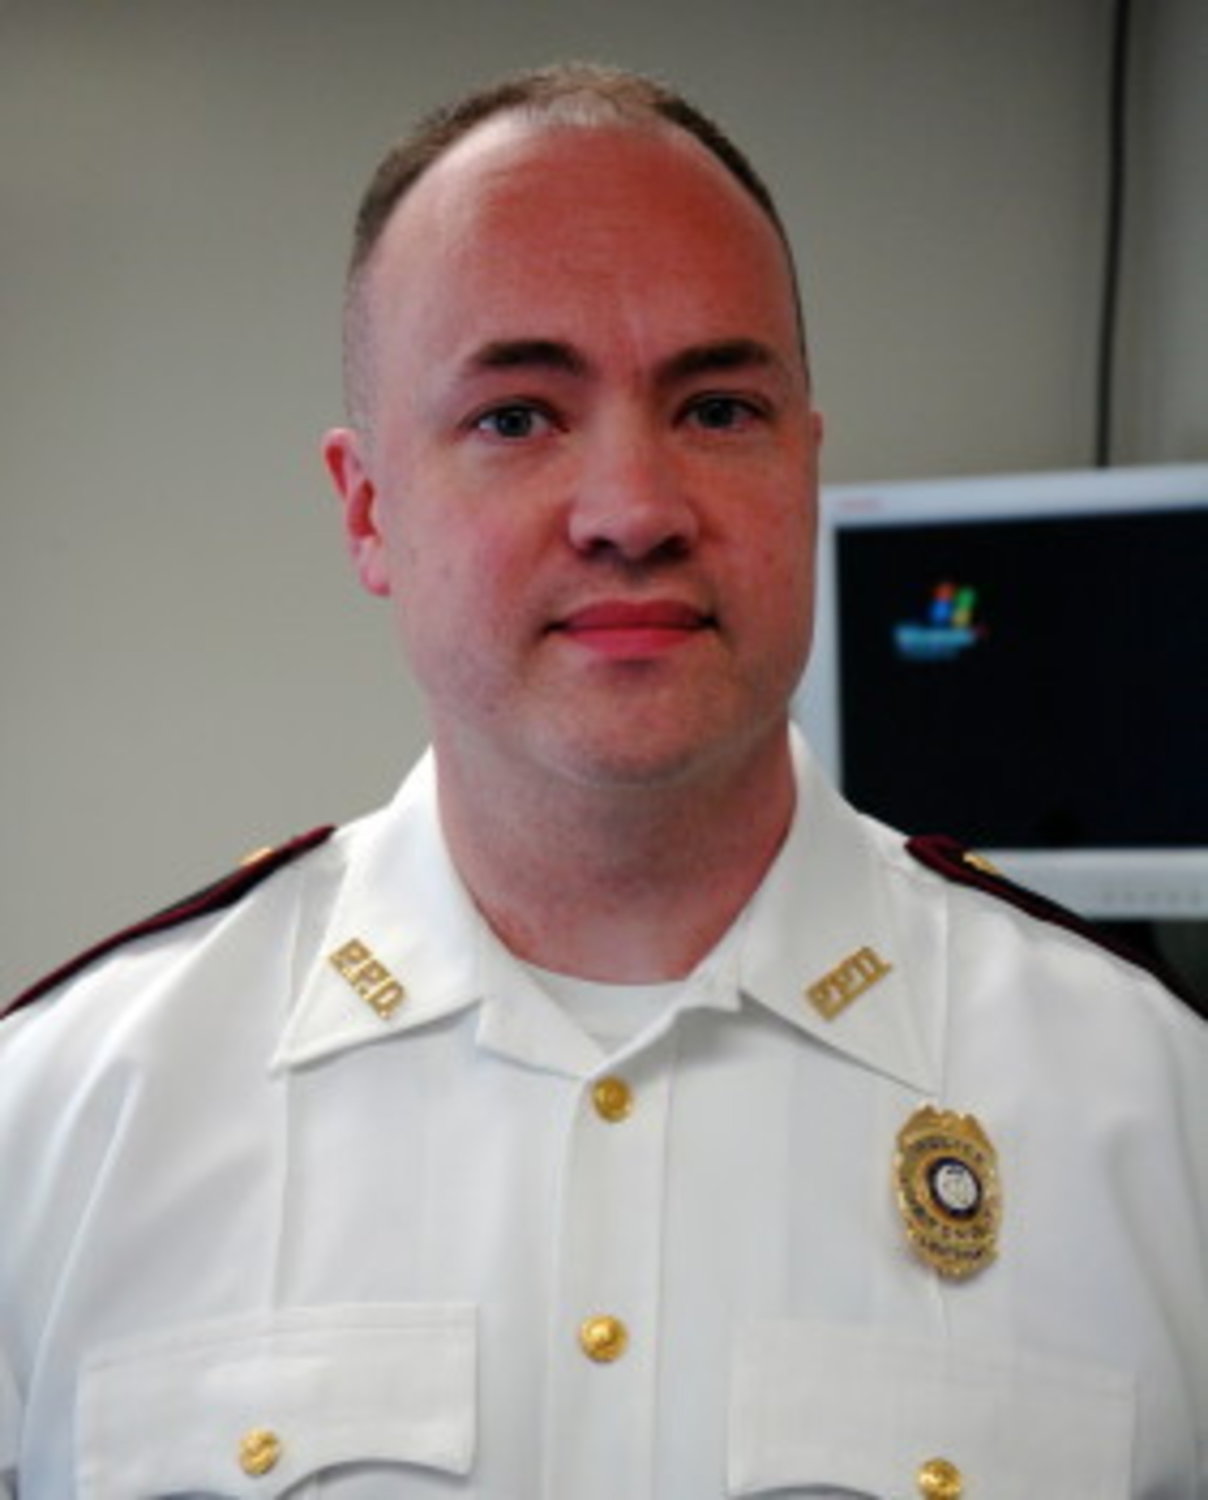 Brian Peters, a former deputy police chief in Portsmouth, has been selected for the chief's job by Town Administrator Richard Rainer, Jr. Col. Peters is currently the interim police chief in Bristol. (File photo)